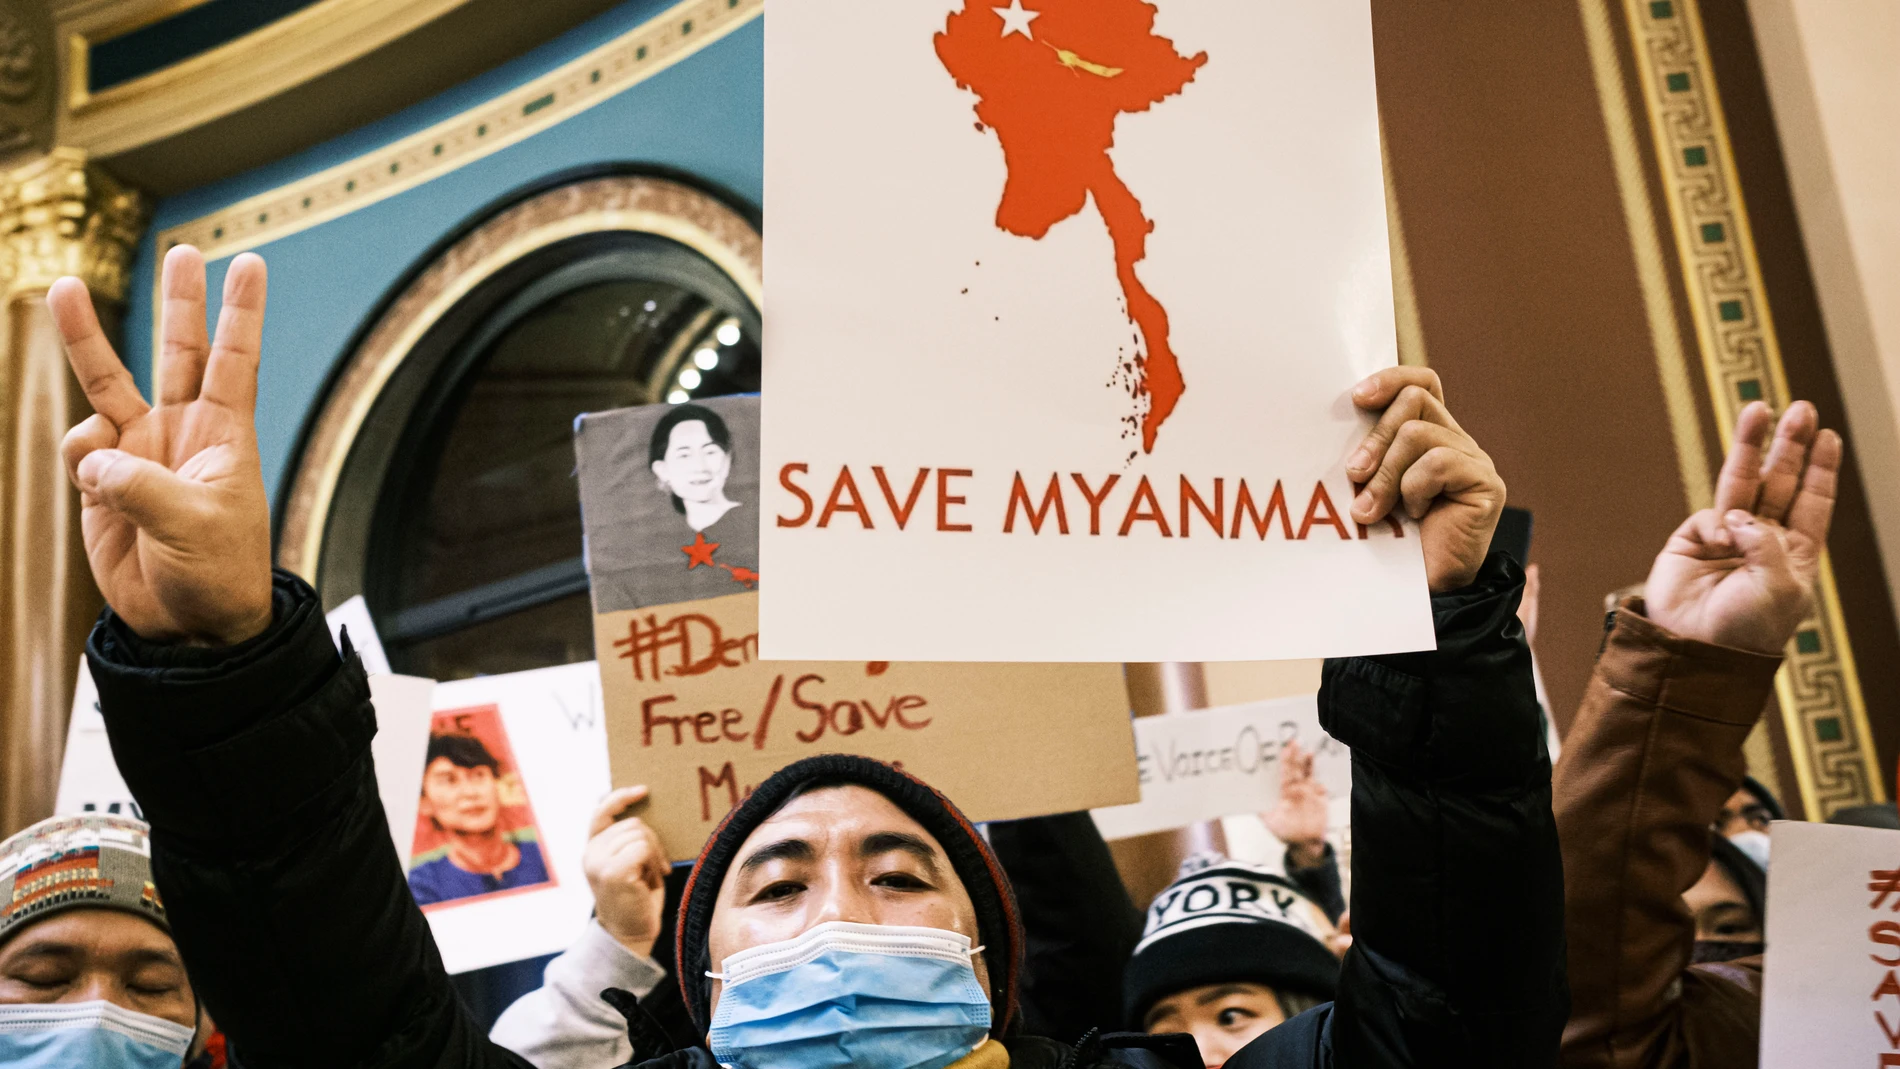 06 February 2021, US, Des Moines: A member of Iowa's Burmese community holds up the three finger salute during a demonstration against the military coup in Myanmar. Myanmar's military seized power on 1 February 2021 and detained government officials including the de facto leader Aung San Suu Kyi. Photo: Jack Kurtz/ZUMA Wire/dpa06/02/2021 ONLY FOR USE IN SPAIN